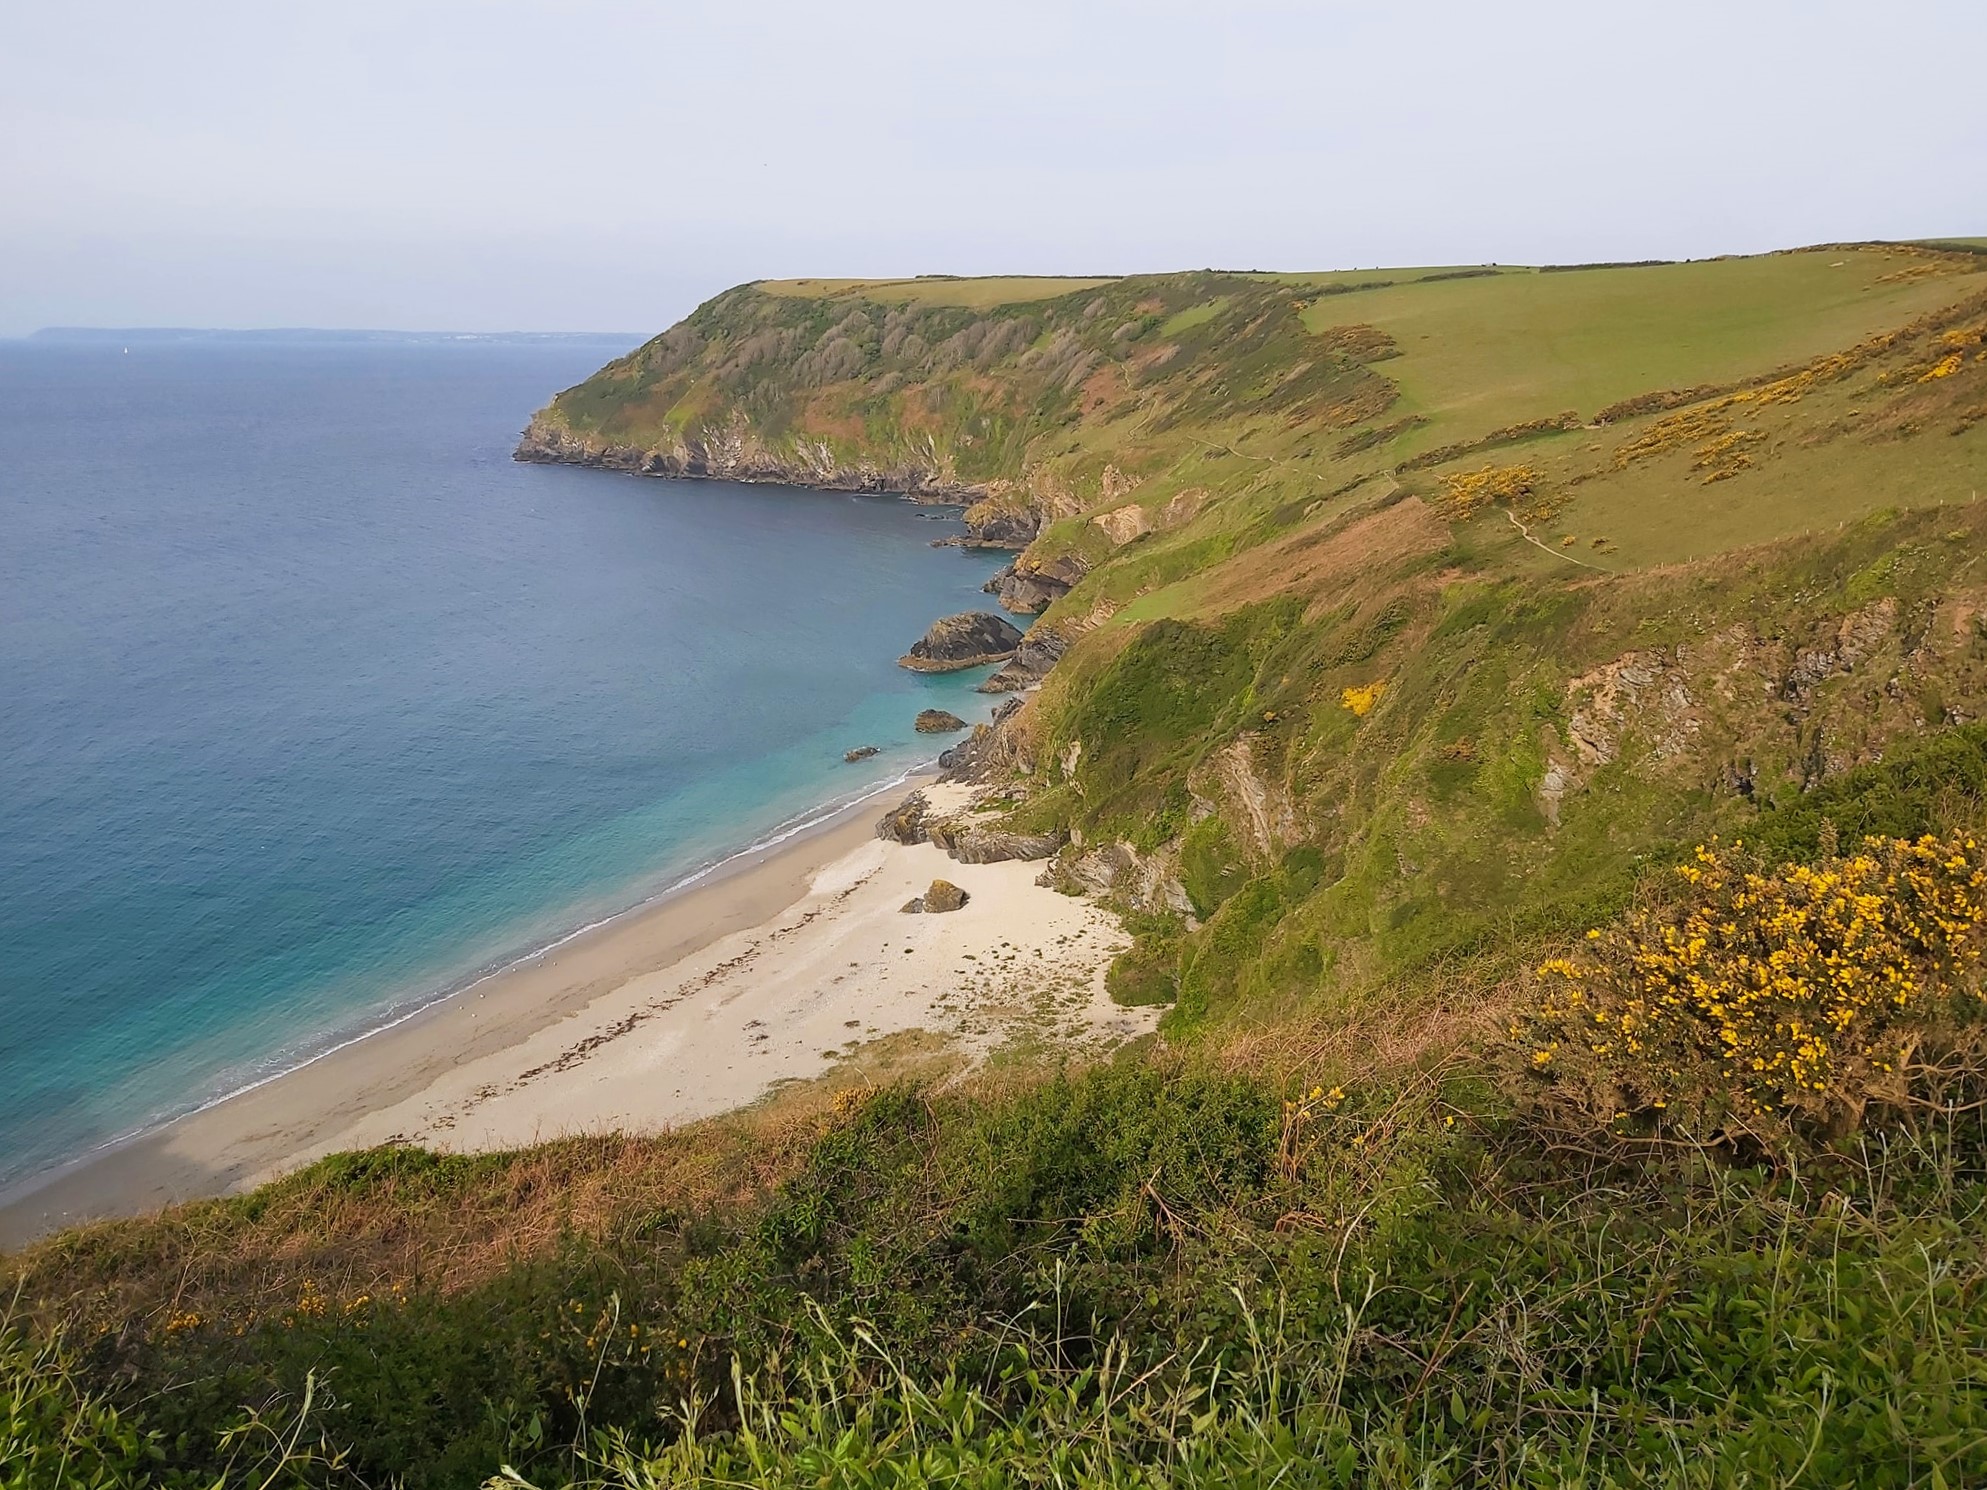 A reaching view across the cliffs of the empty Lantic Bay Beach in Cornwall, England.